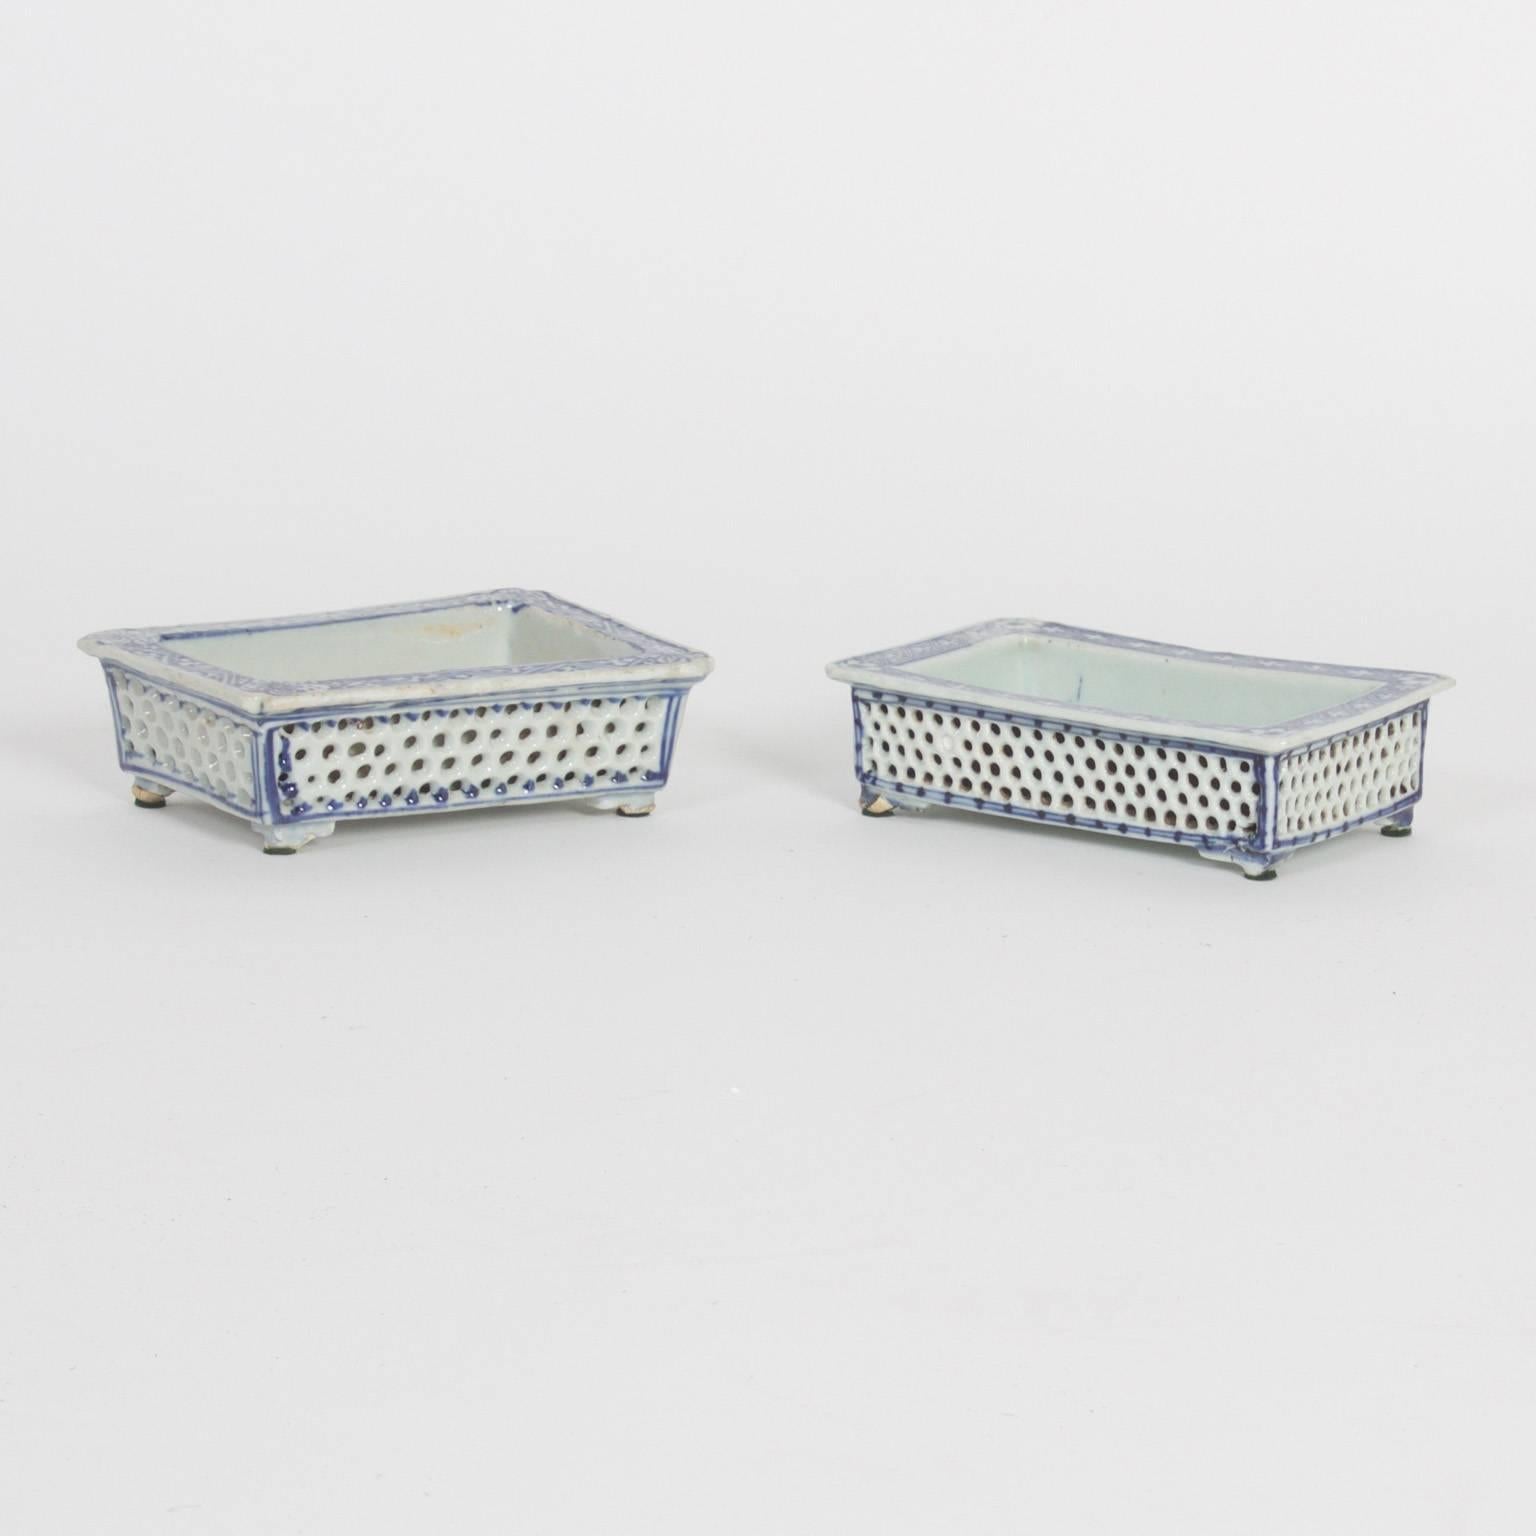 Three Chinese porcelain blue and white narcissus trays with their traditional form, floral decorations, reticulated sides and petite feet. Also available individually. 

From left to right:

H: 2 W: 7 D: 4.5 $895.00.

H: 2.5 W: 9.5 D: 6.5